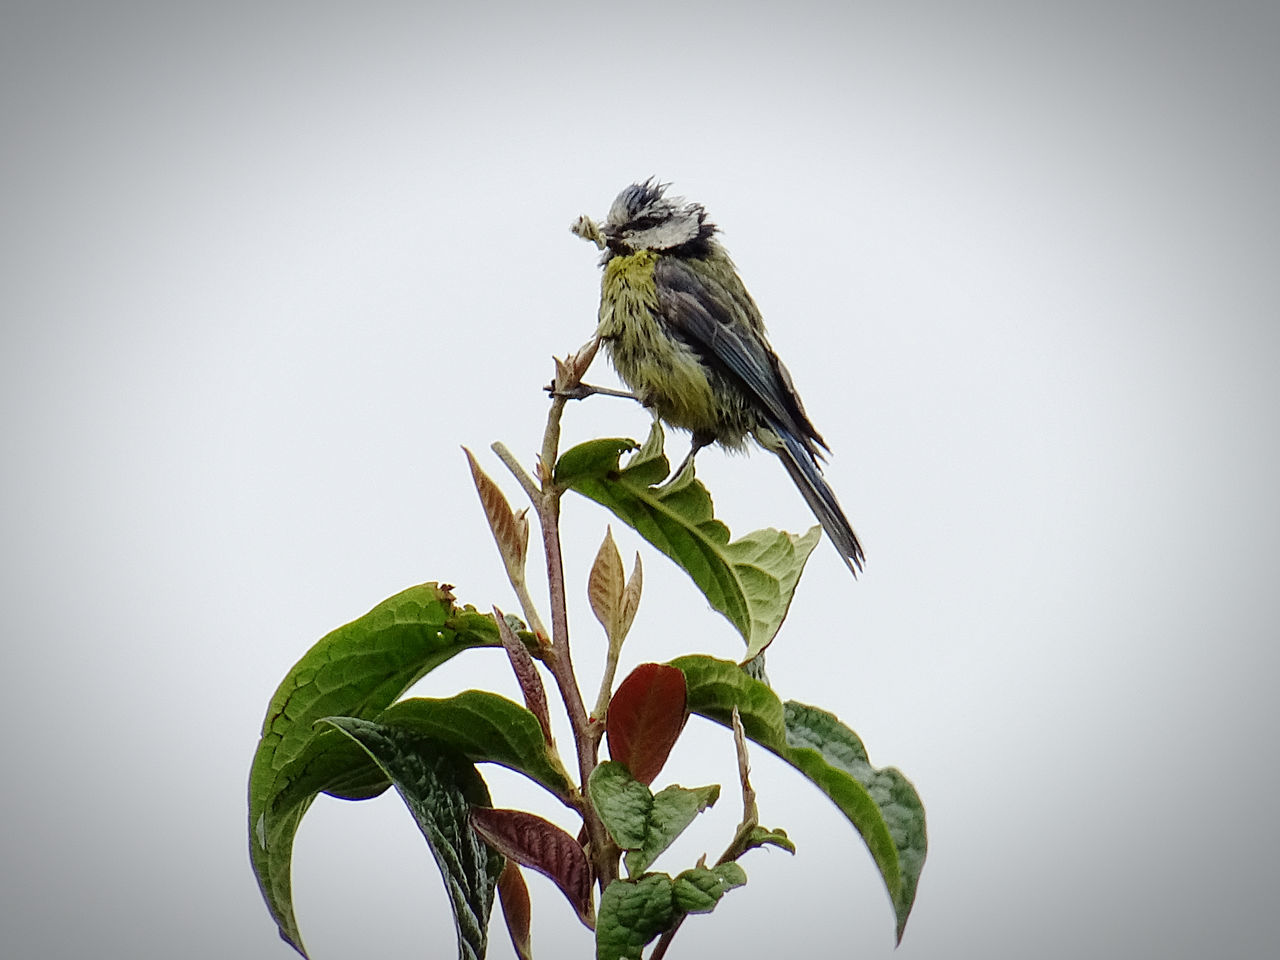 animal themes, animal, animal wildlife, bird, green, branch, wildlife, leaf, plant part, plant, one animal, nature, perching, no people, close-up, gray, tree, copy space, beauty in nature, macro photography, outdoors, full length, flower, gray background, environment